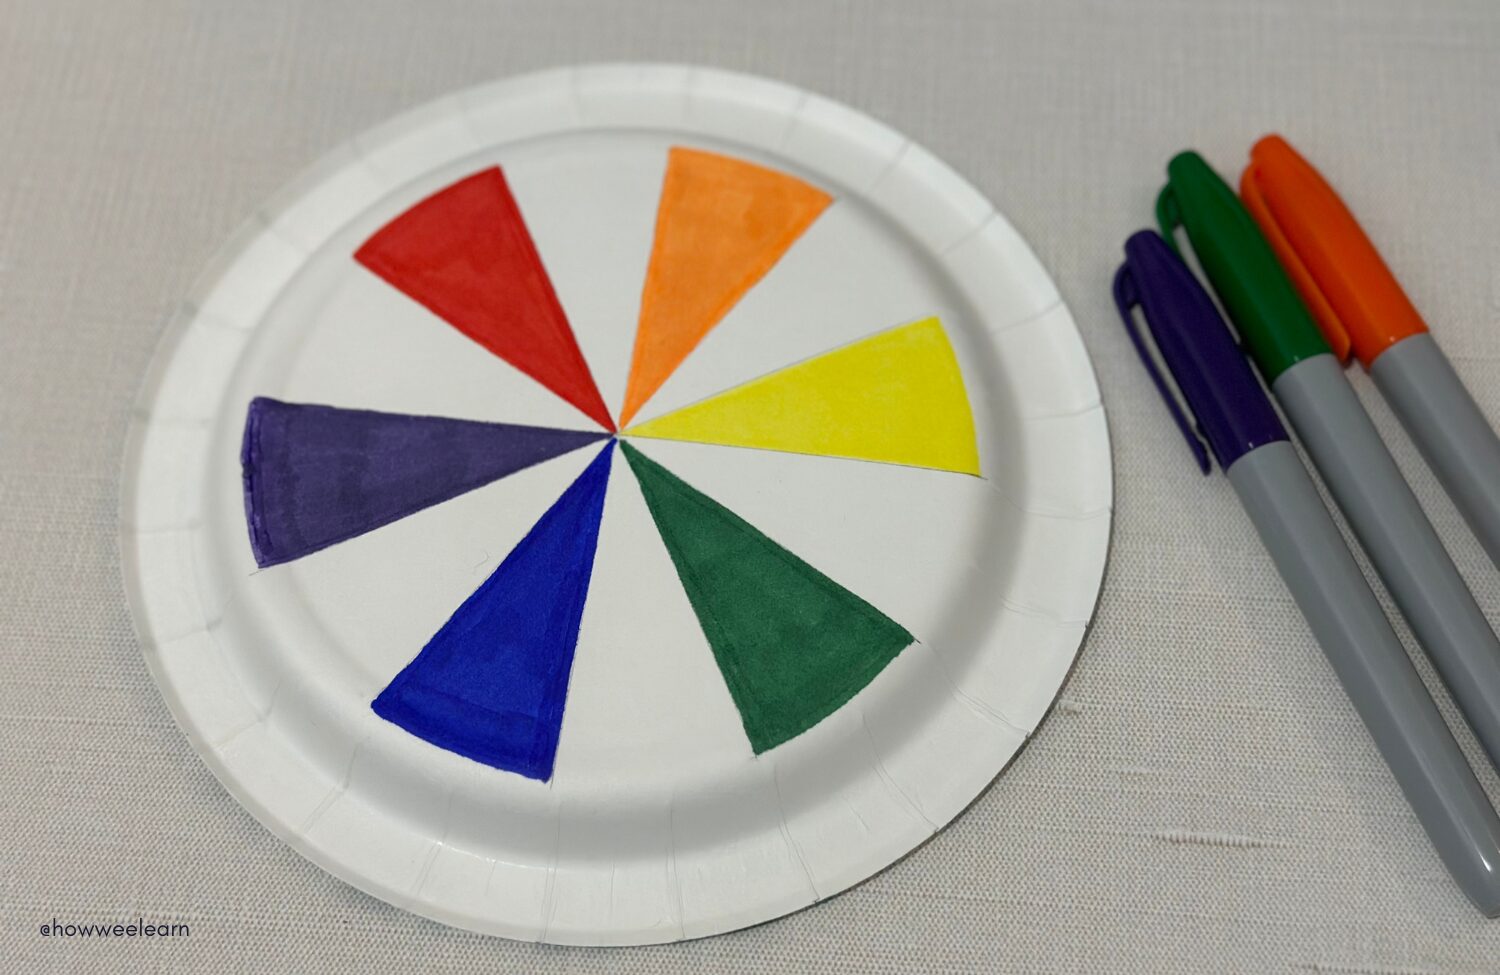 Primary and Secondary Colors on a Color Wheel